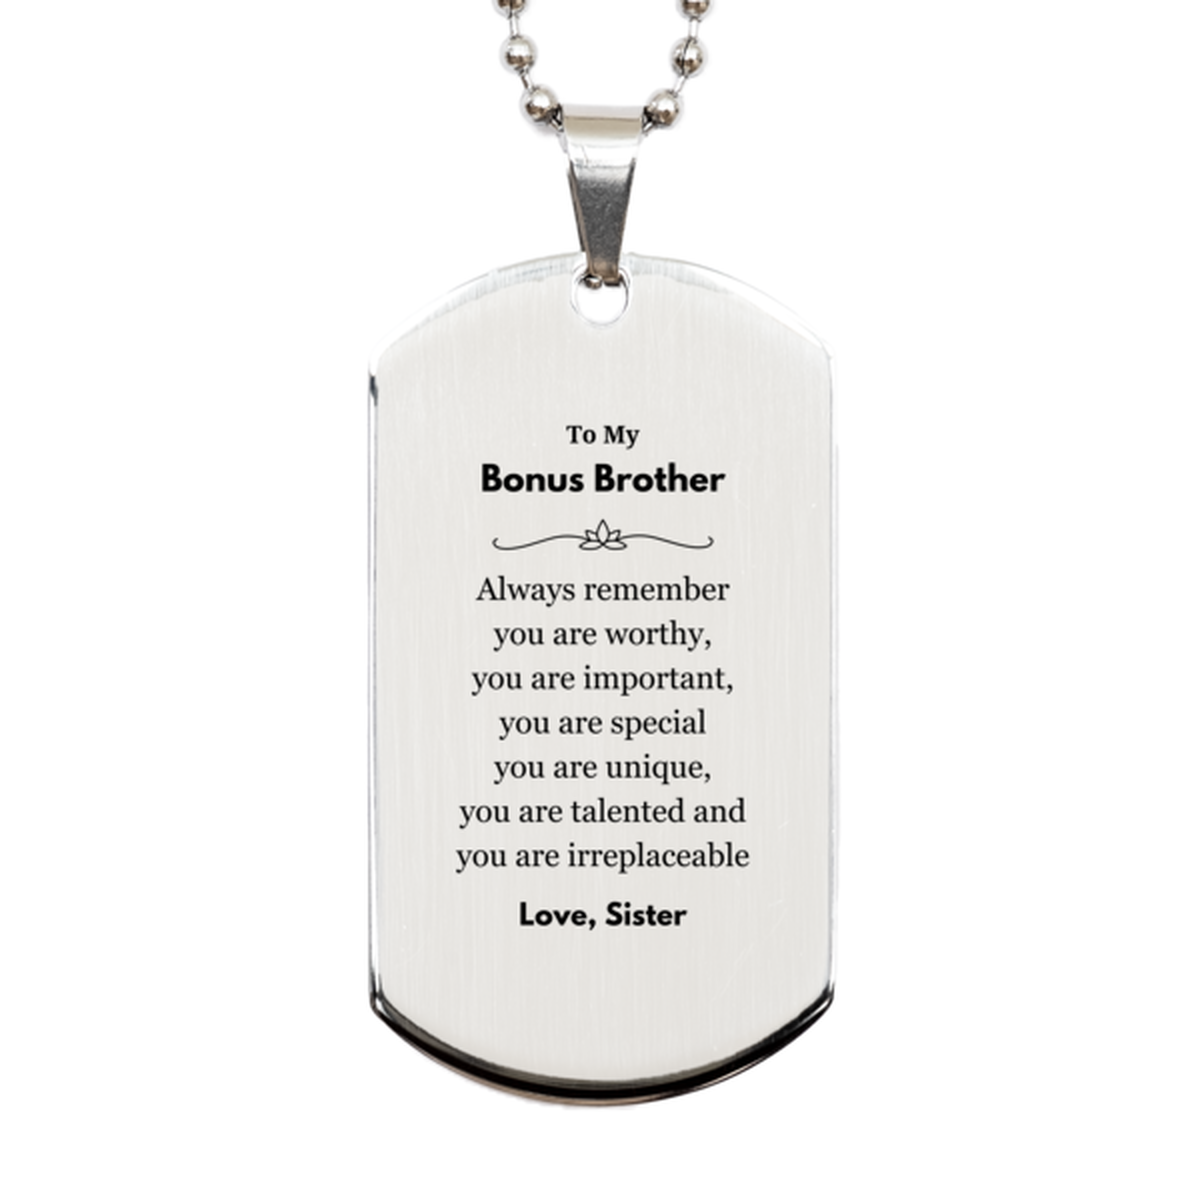 Bonus Brother Birthday Gifts from Sister, Inspirational Silver Dog Tag for Bonus Brother Christmas Graduation Gifts for Bonus Brother Always remember you are worthy, you are important. Love, Sister